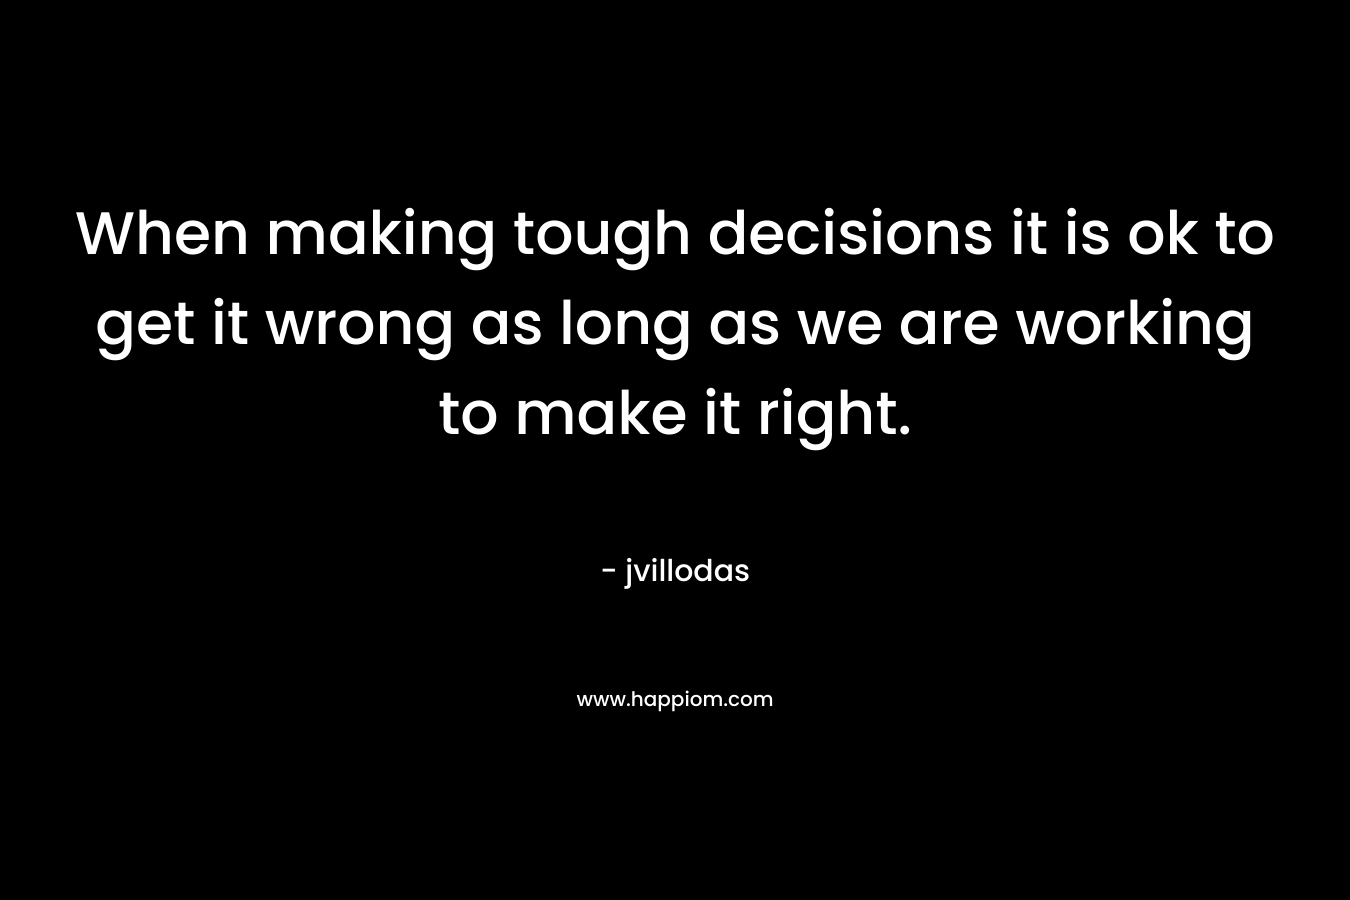 When making tough decisions it is ok to get it wrong as long as we are working to make it right. – jvillodas